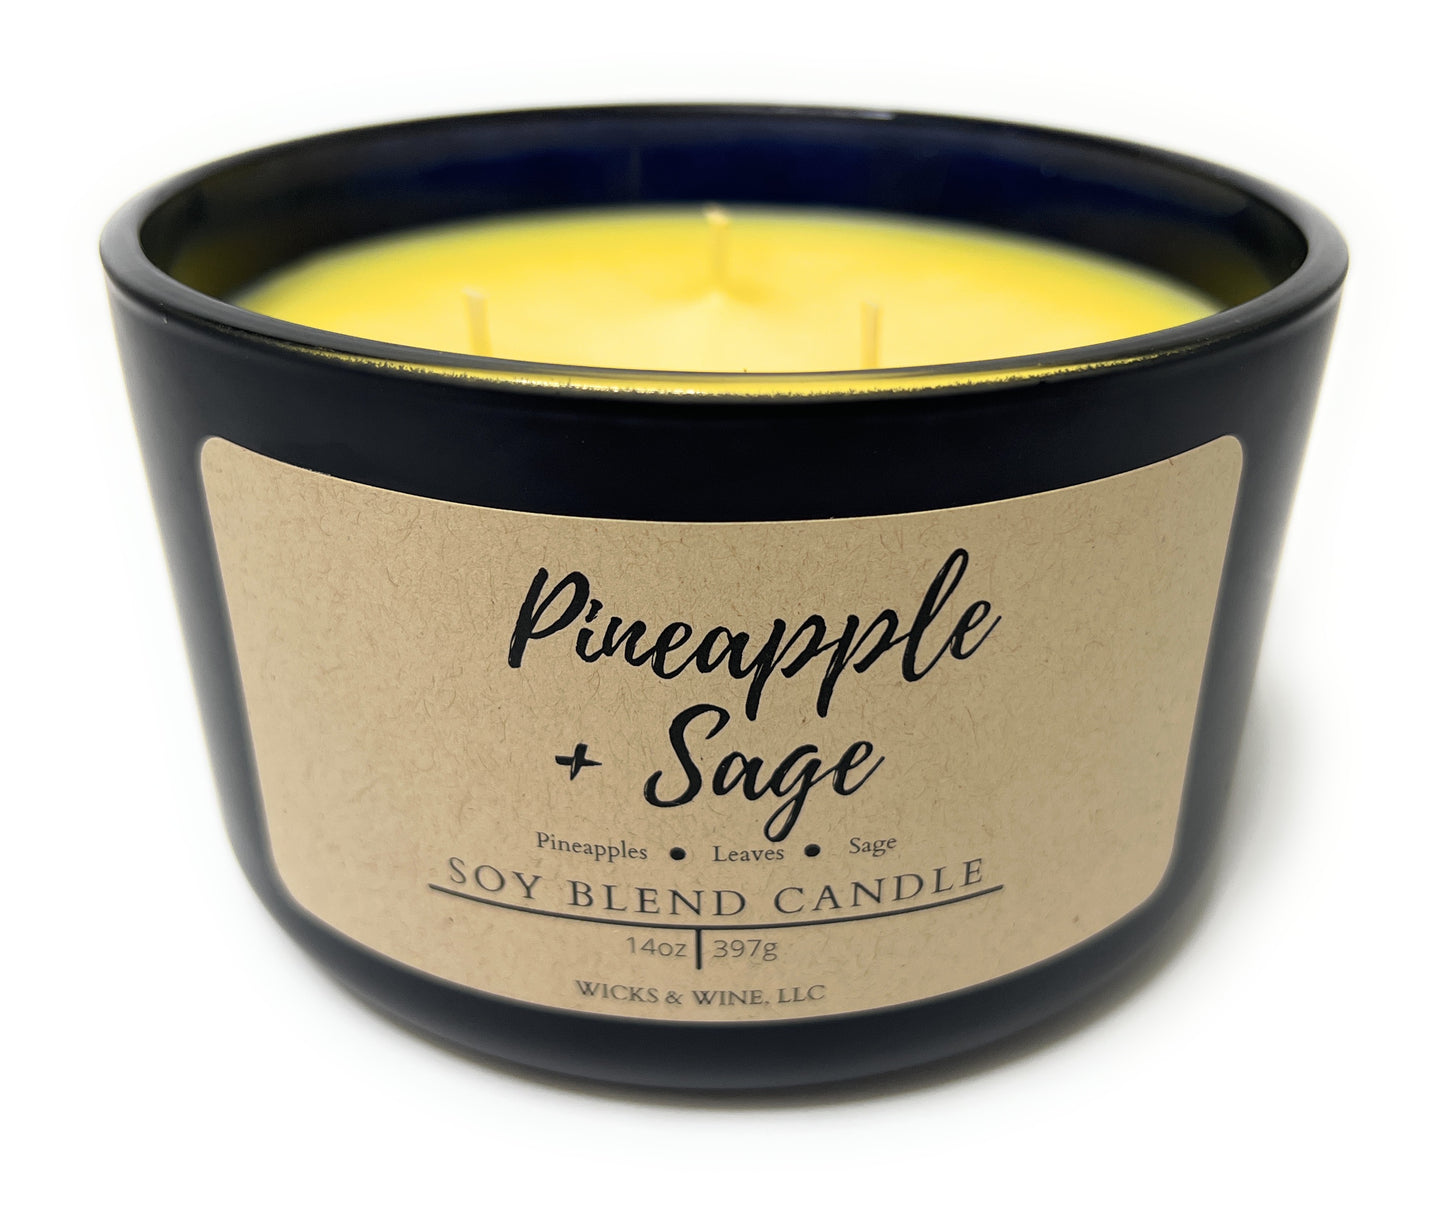 Pineapple + Sage 3 Wick Candle